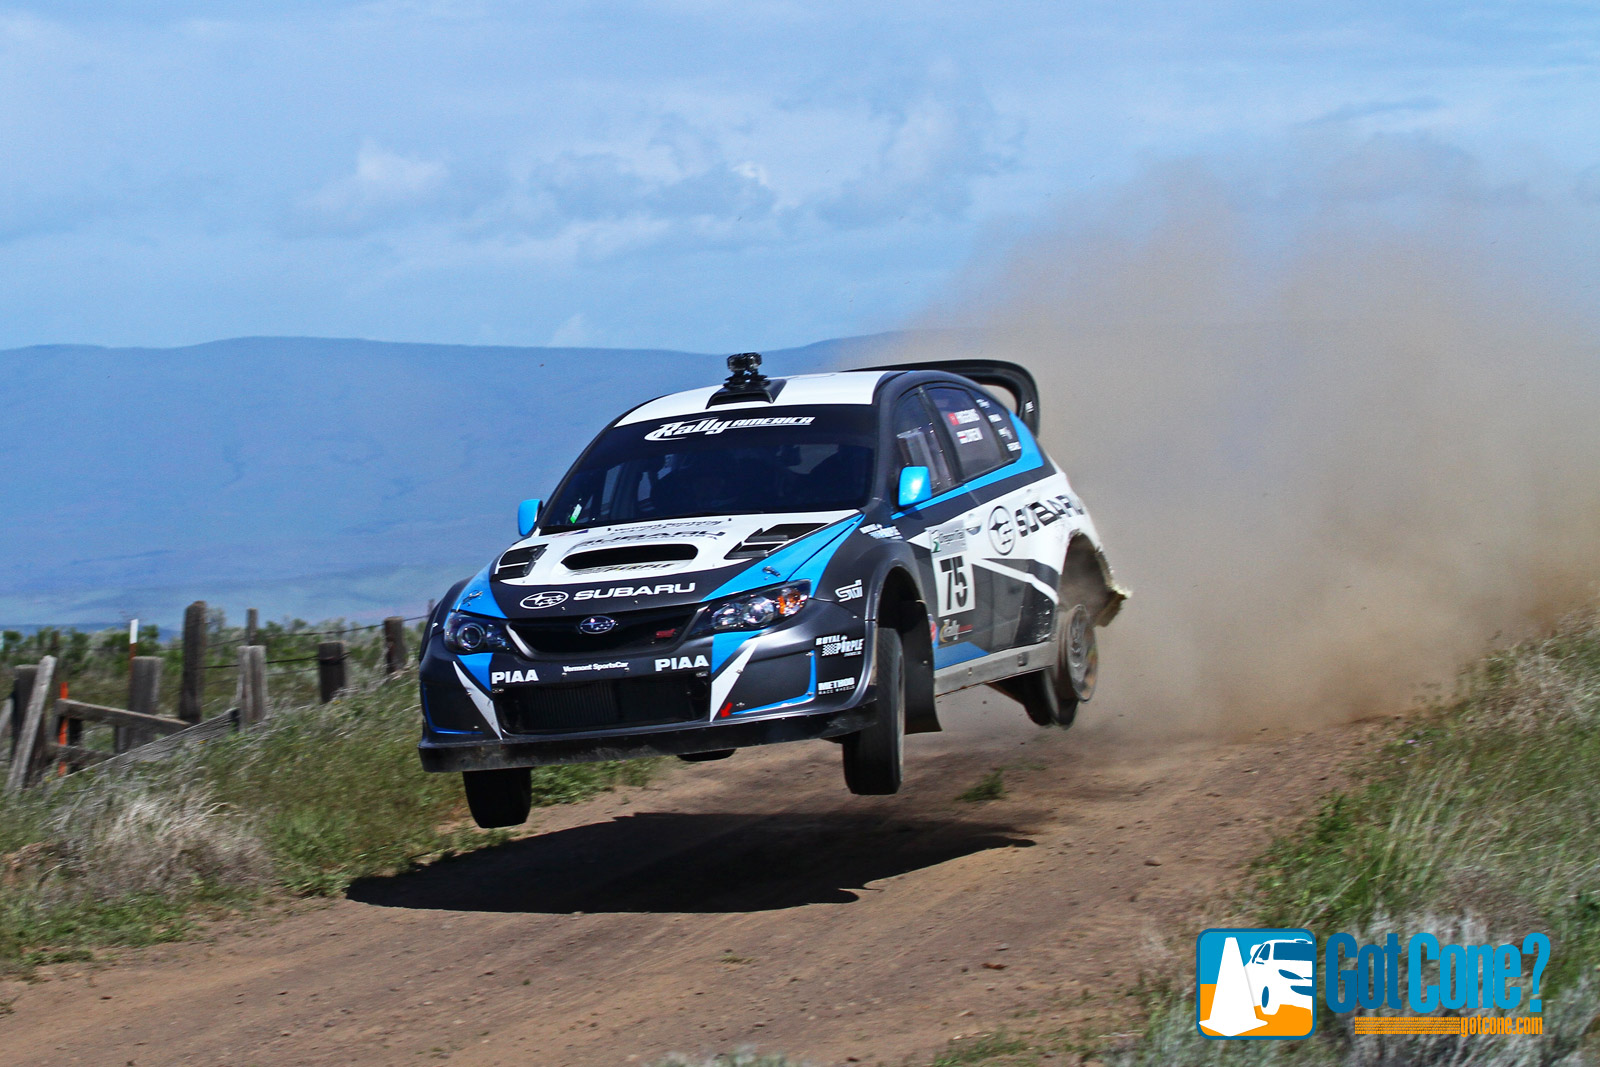 David Higgins jumps his Subaru Rally Car with only 3 tires.